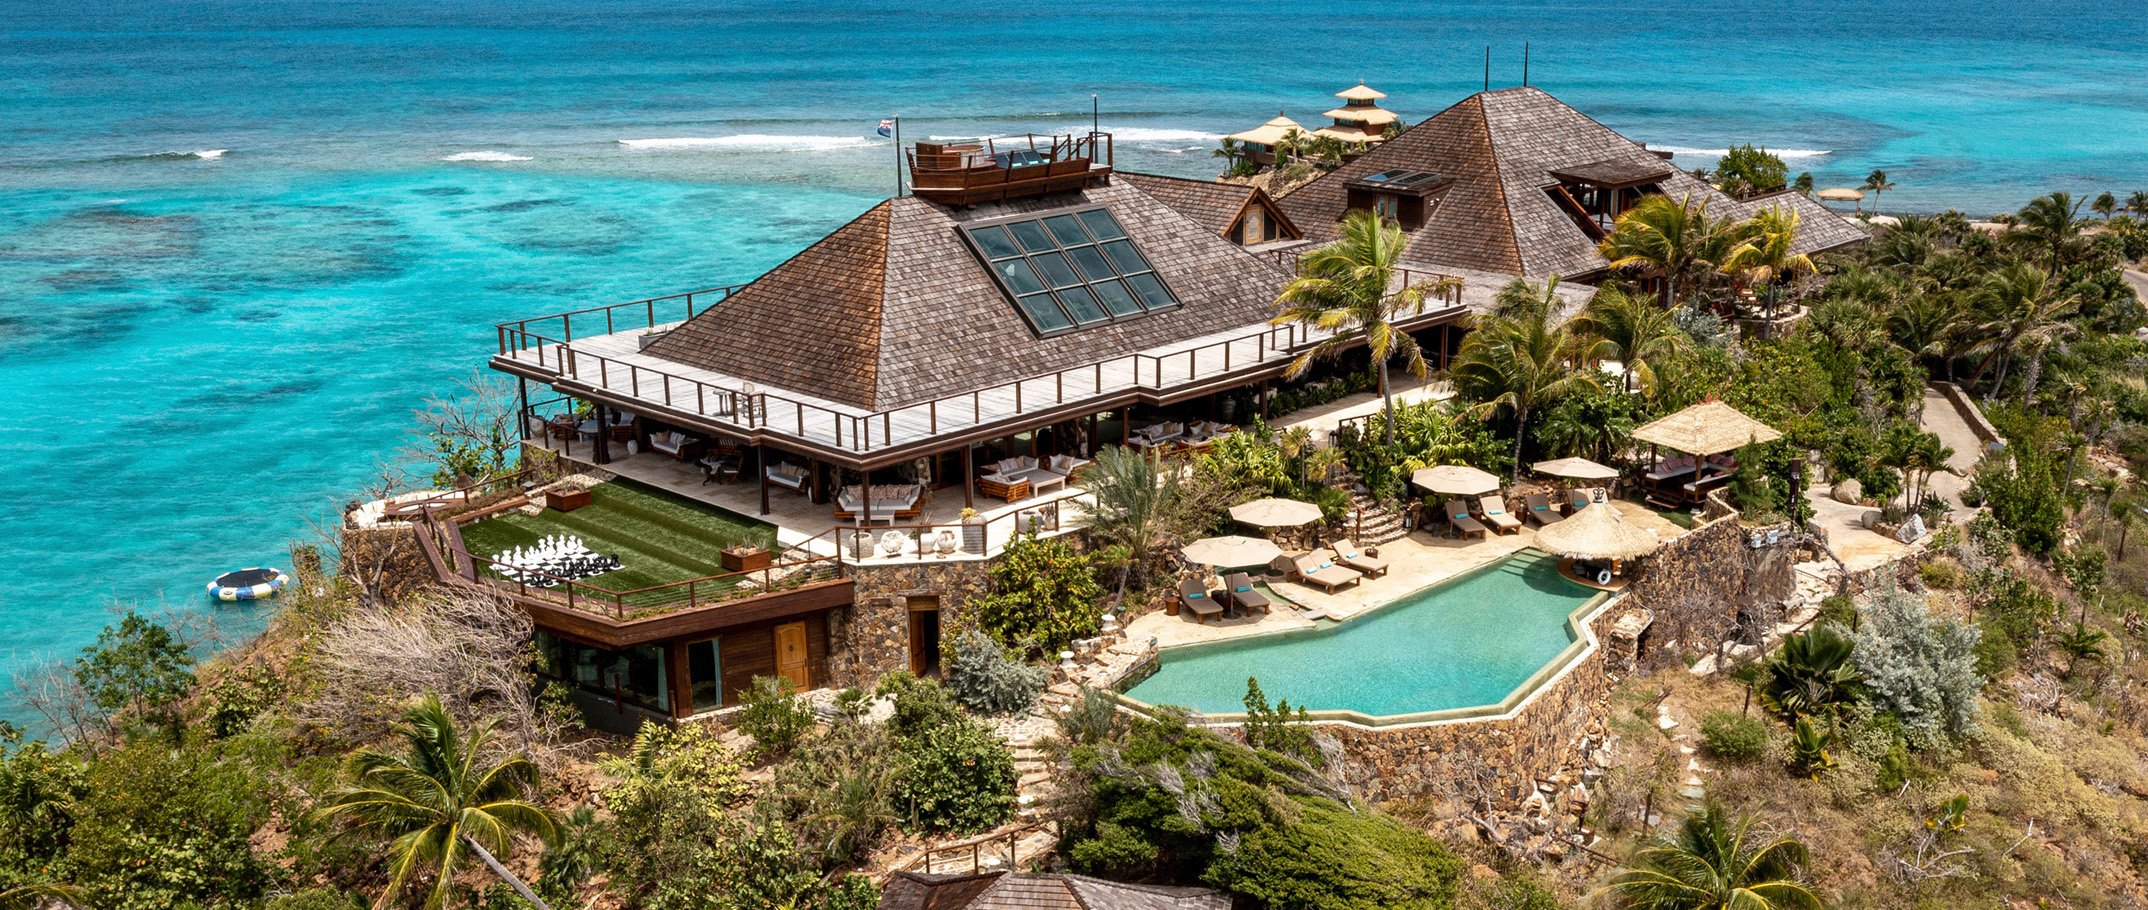 necker-island-the-great-house-overview-2.jpeg